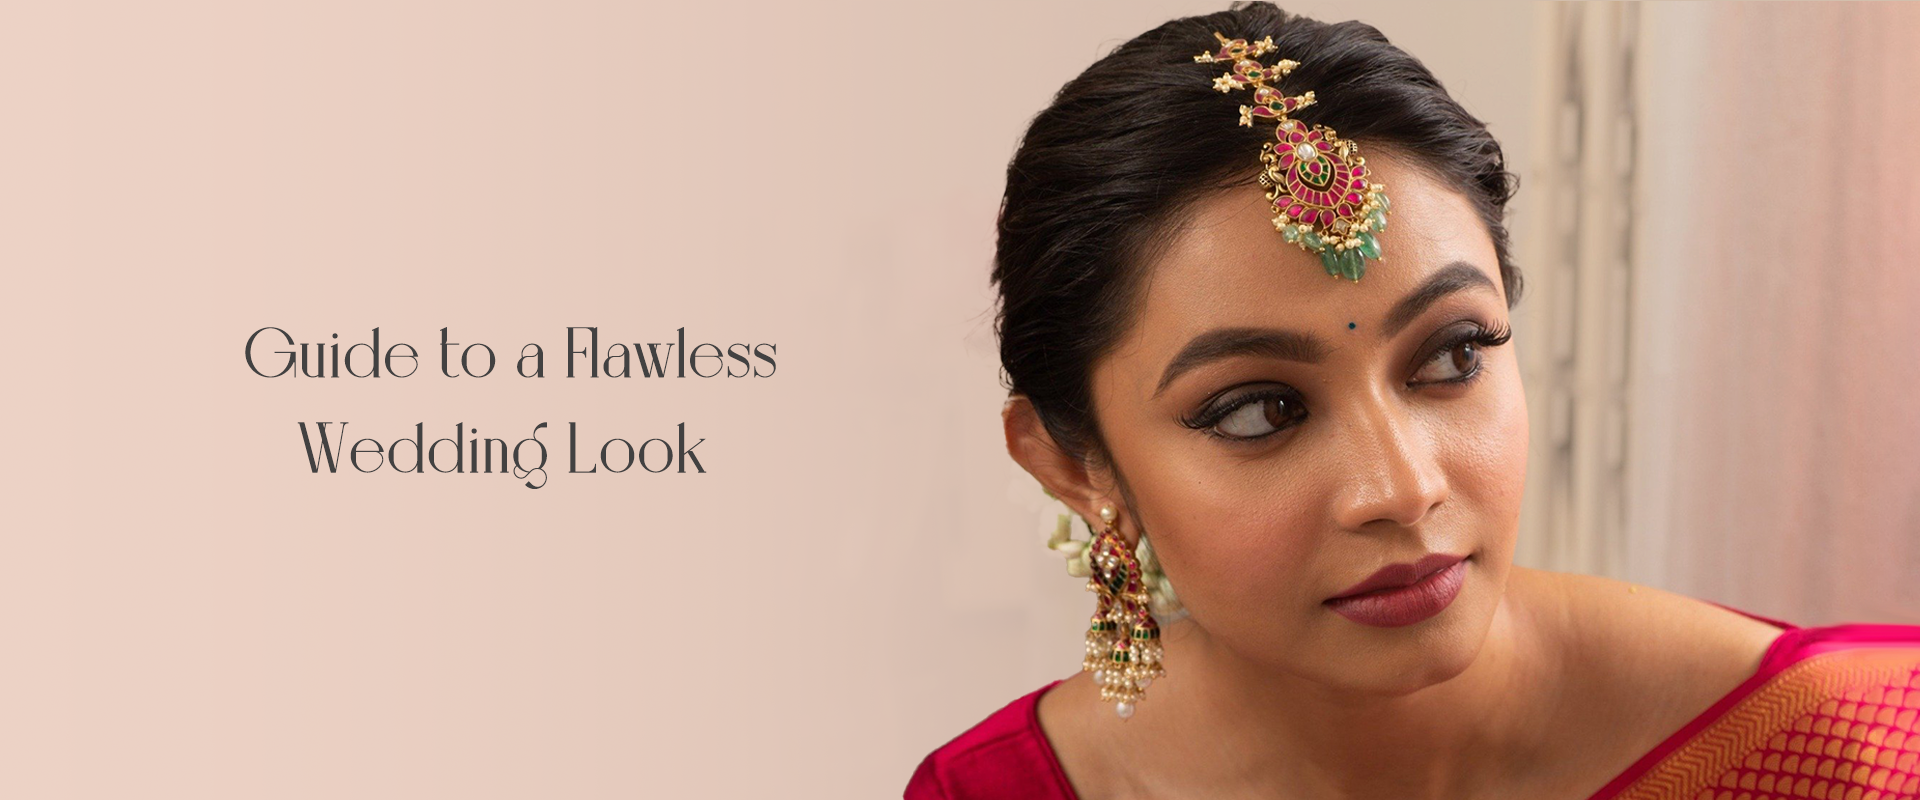 Guide to a Flawless Wedding Look